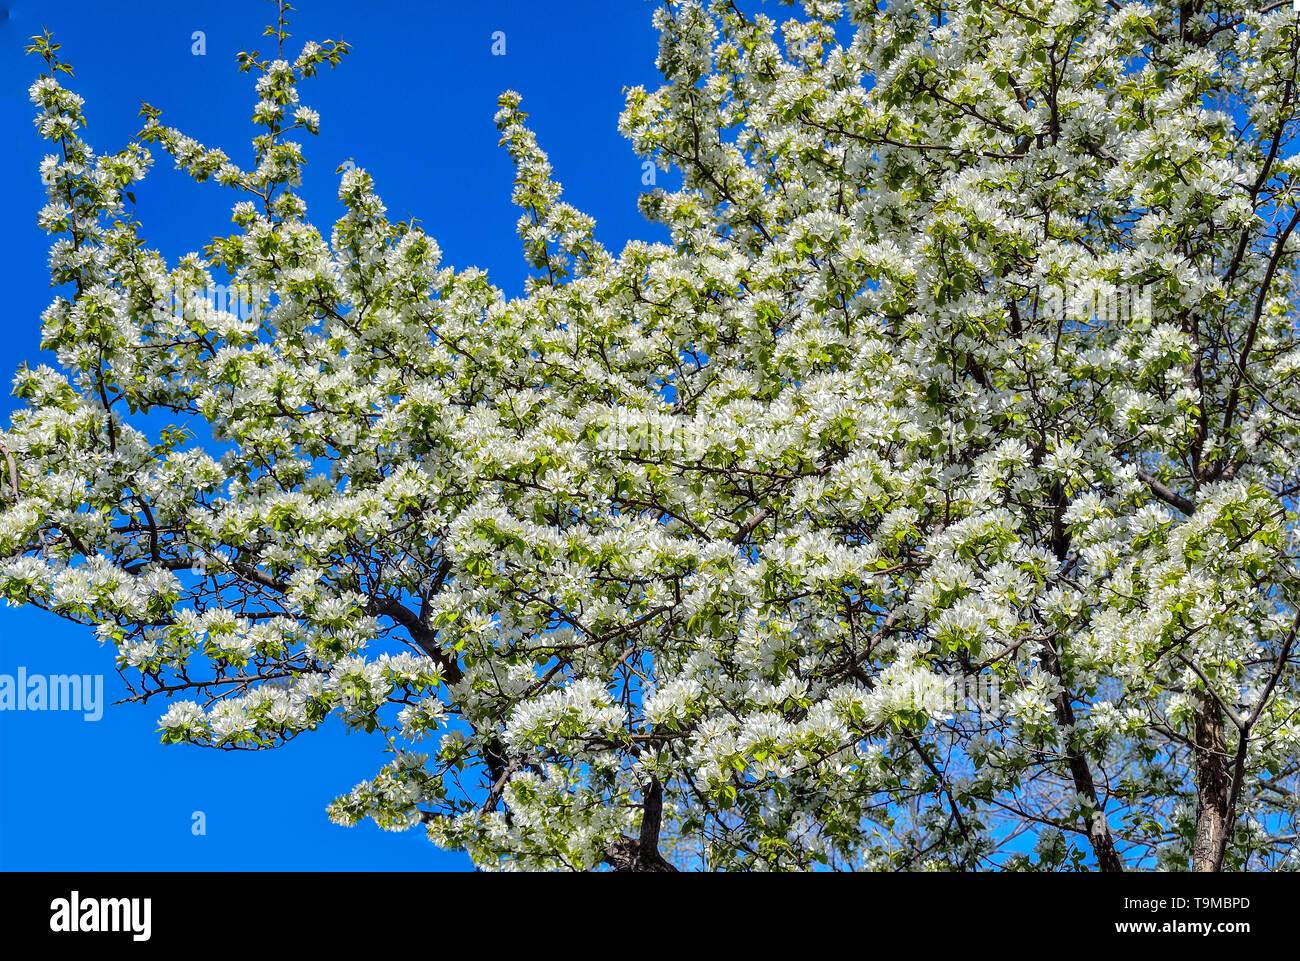 Blooming apple tree crown with gentle white flowers on branches on a bright blue sky background as white fragrance cloud - romantic seasonal spring ba Stock Photo